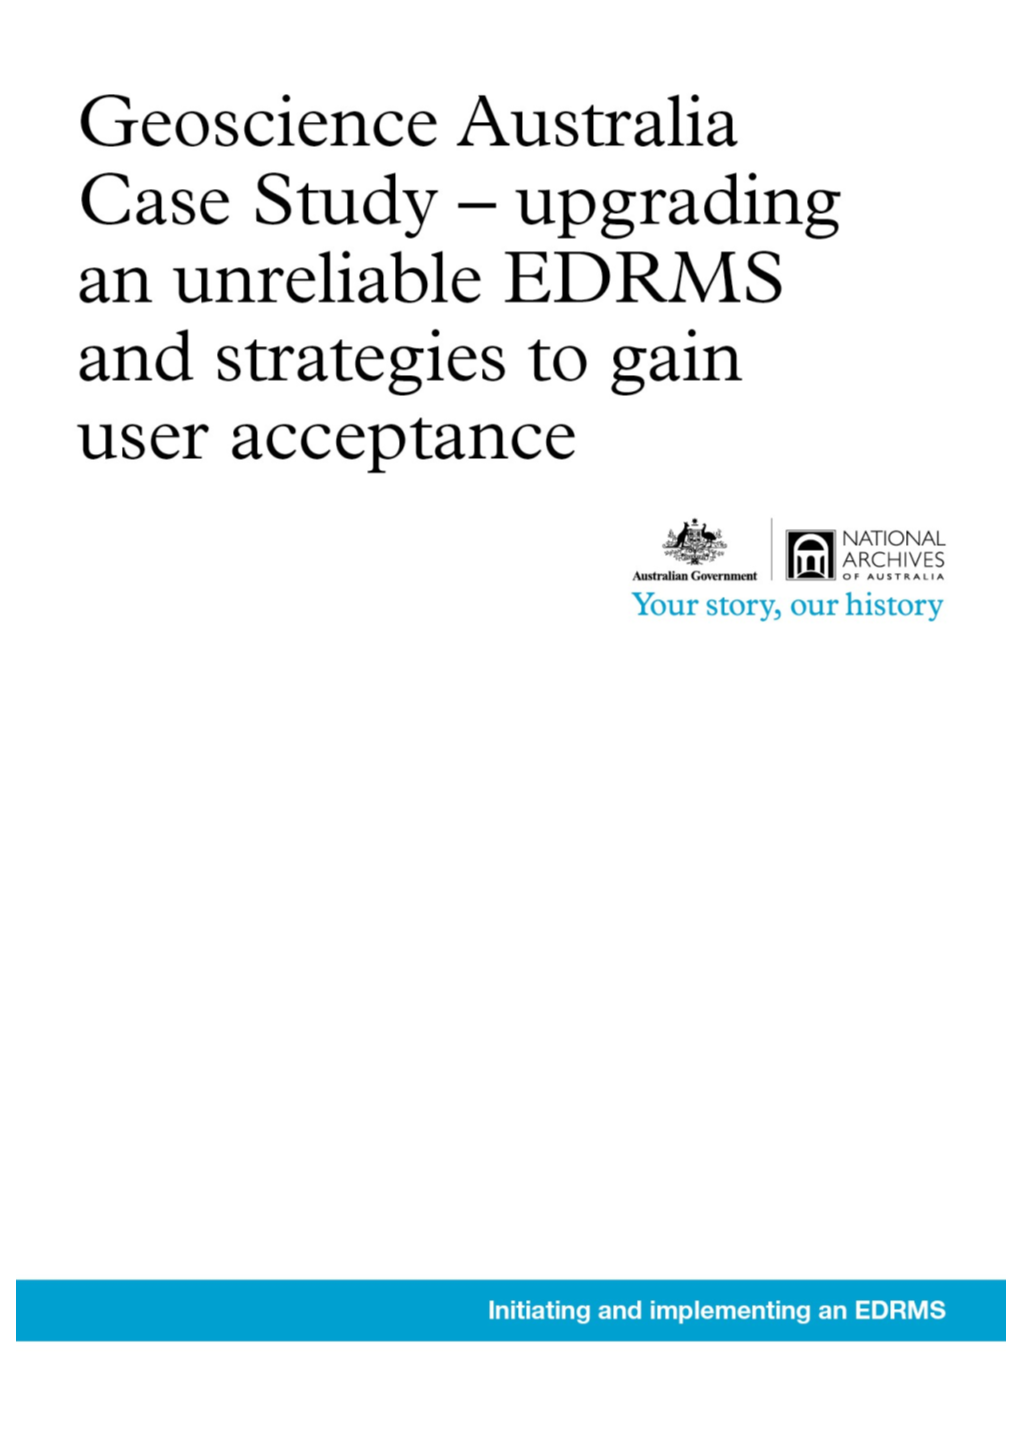 Implementing Electronic Records Management Systems (ERMS):